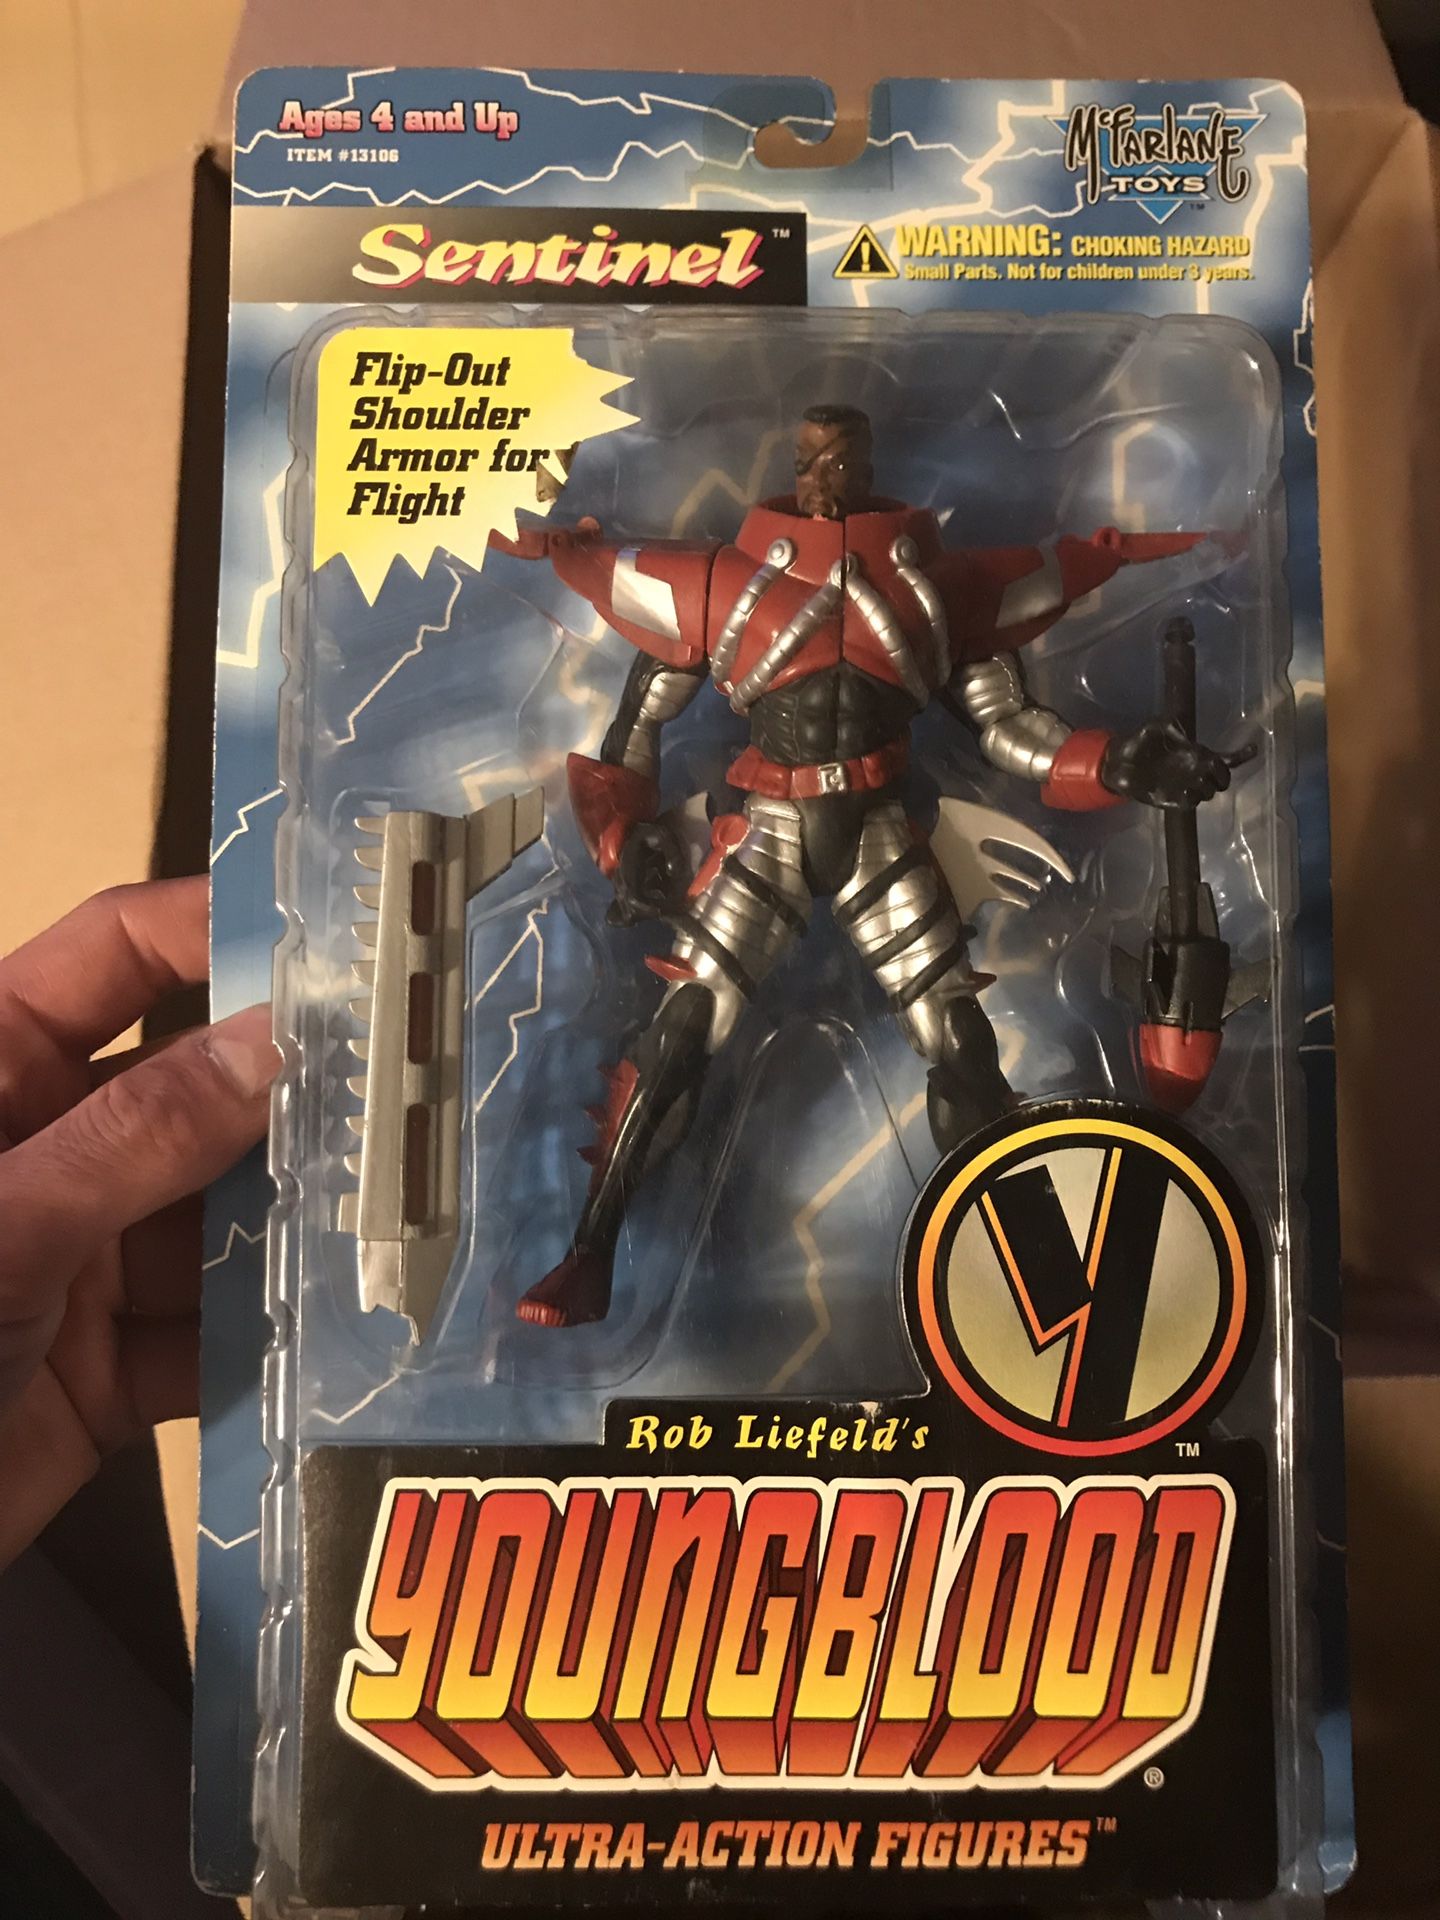 Rob Liefield’s Youngblood Sentinel action figure